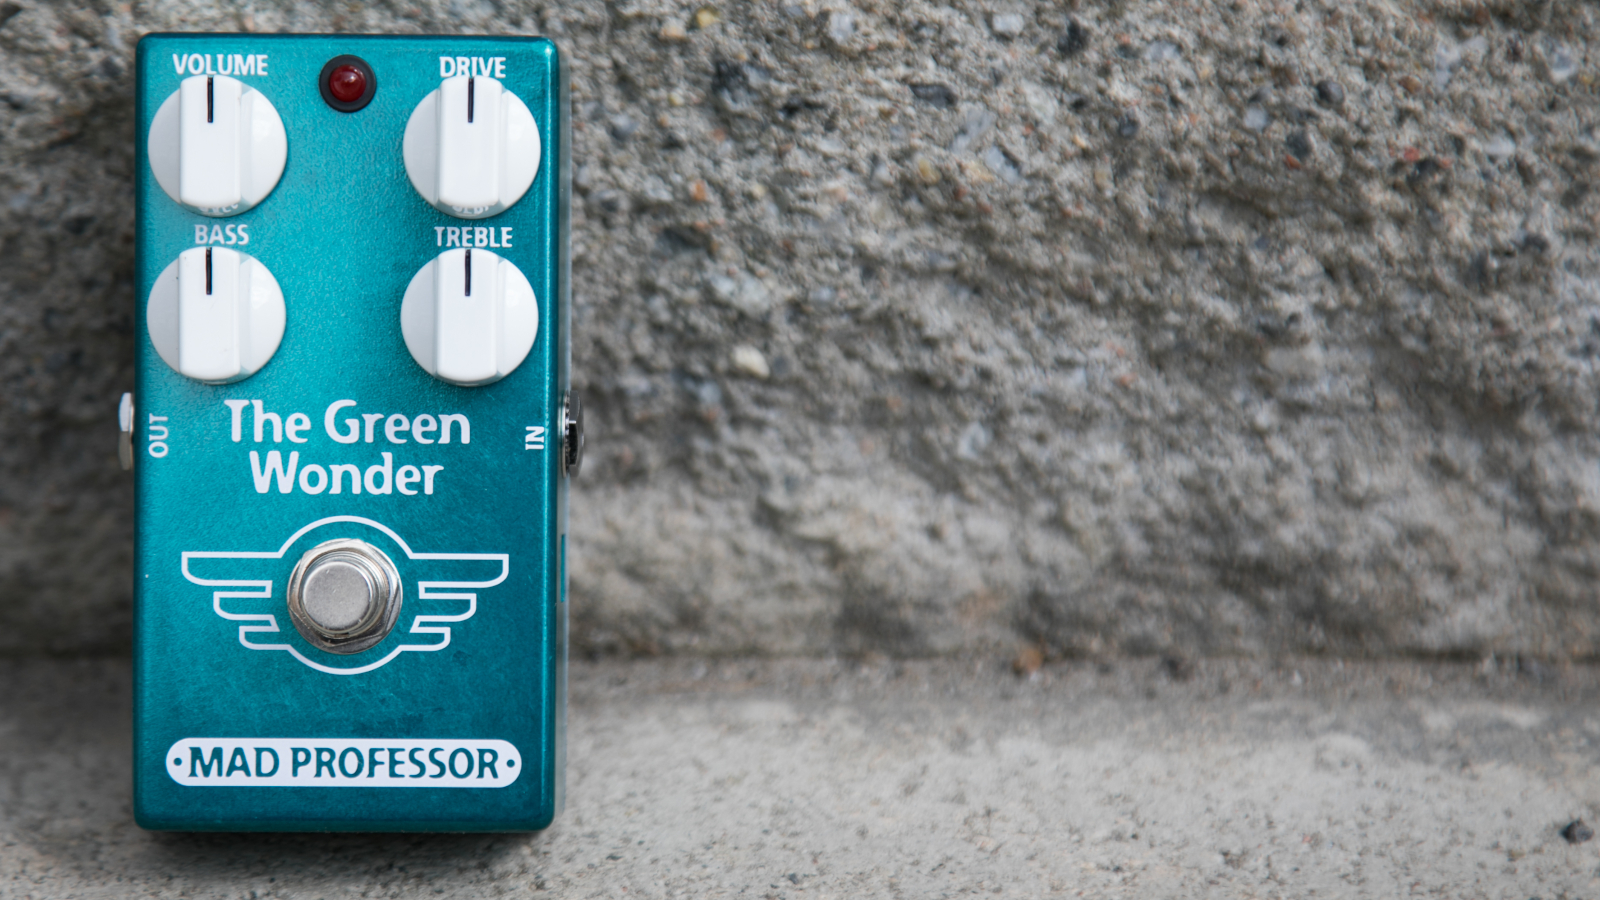 Mad Professor promises their new Green Wonder overdrive is the